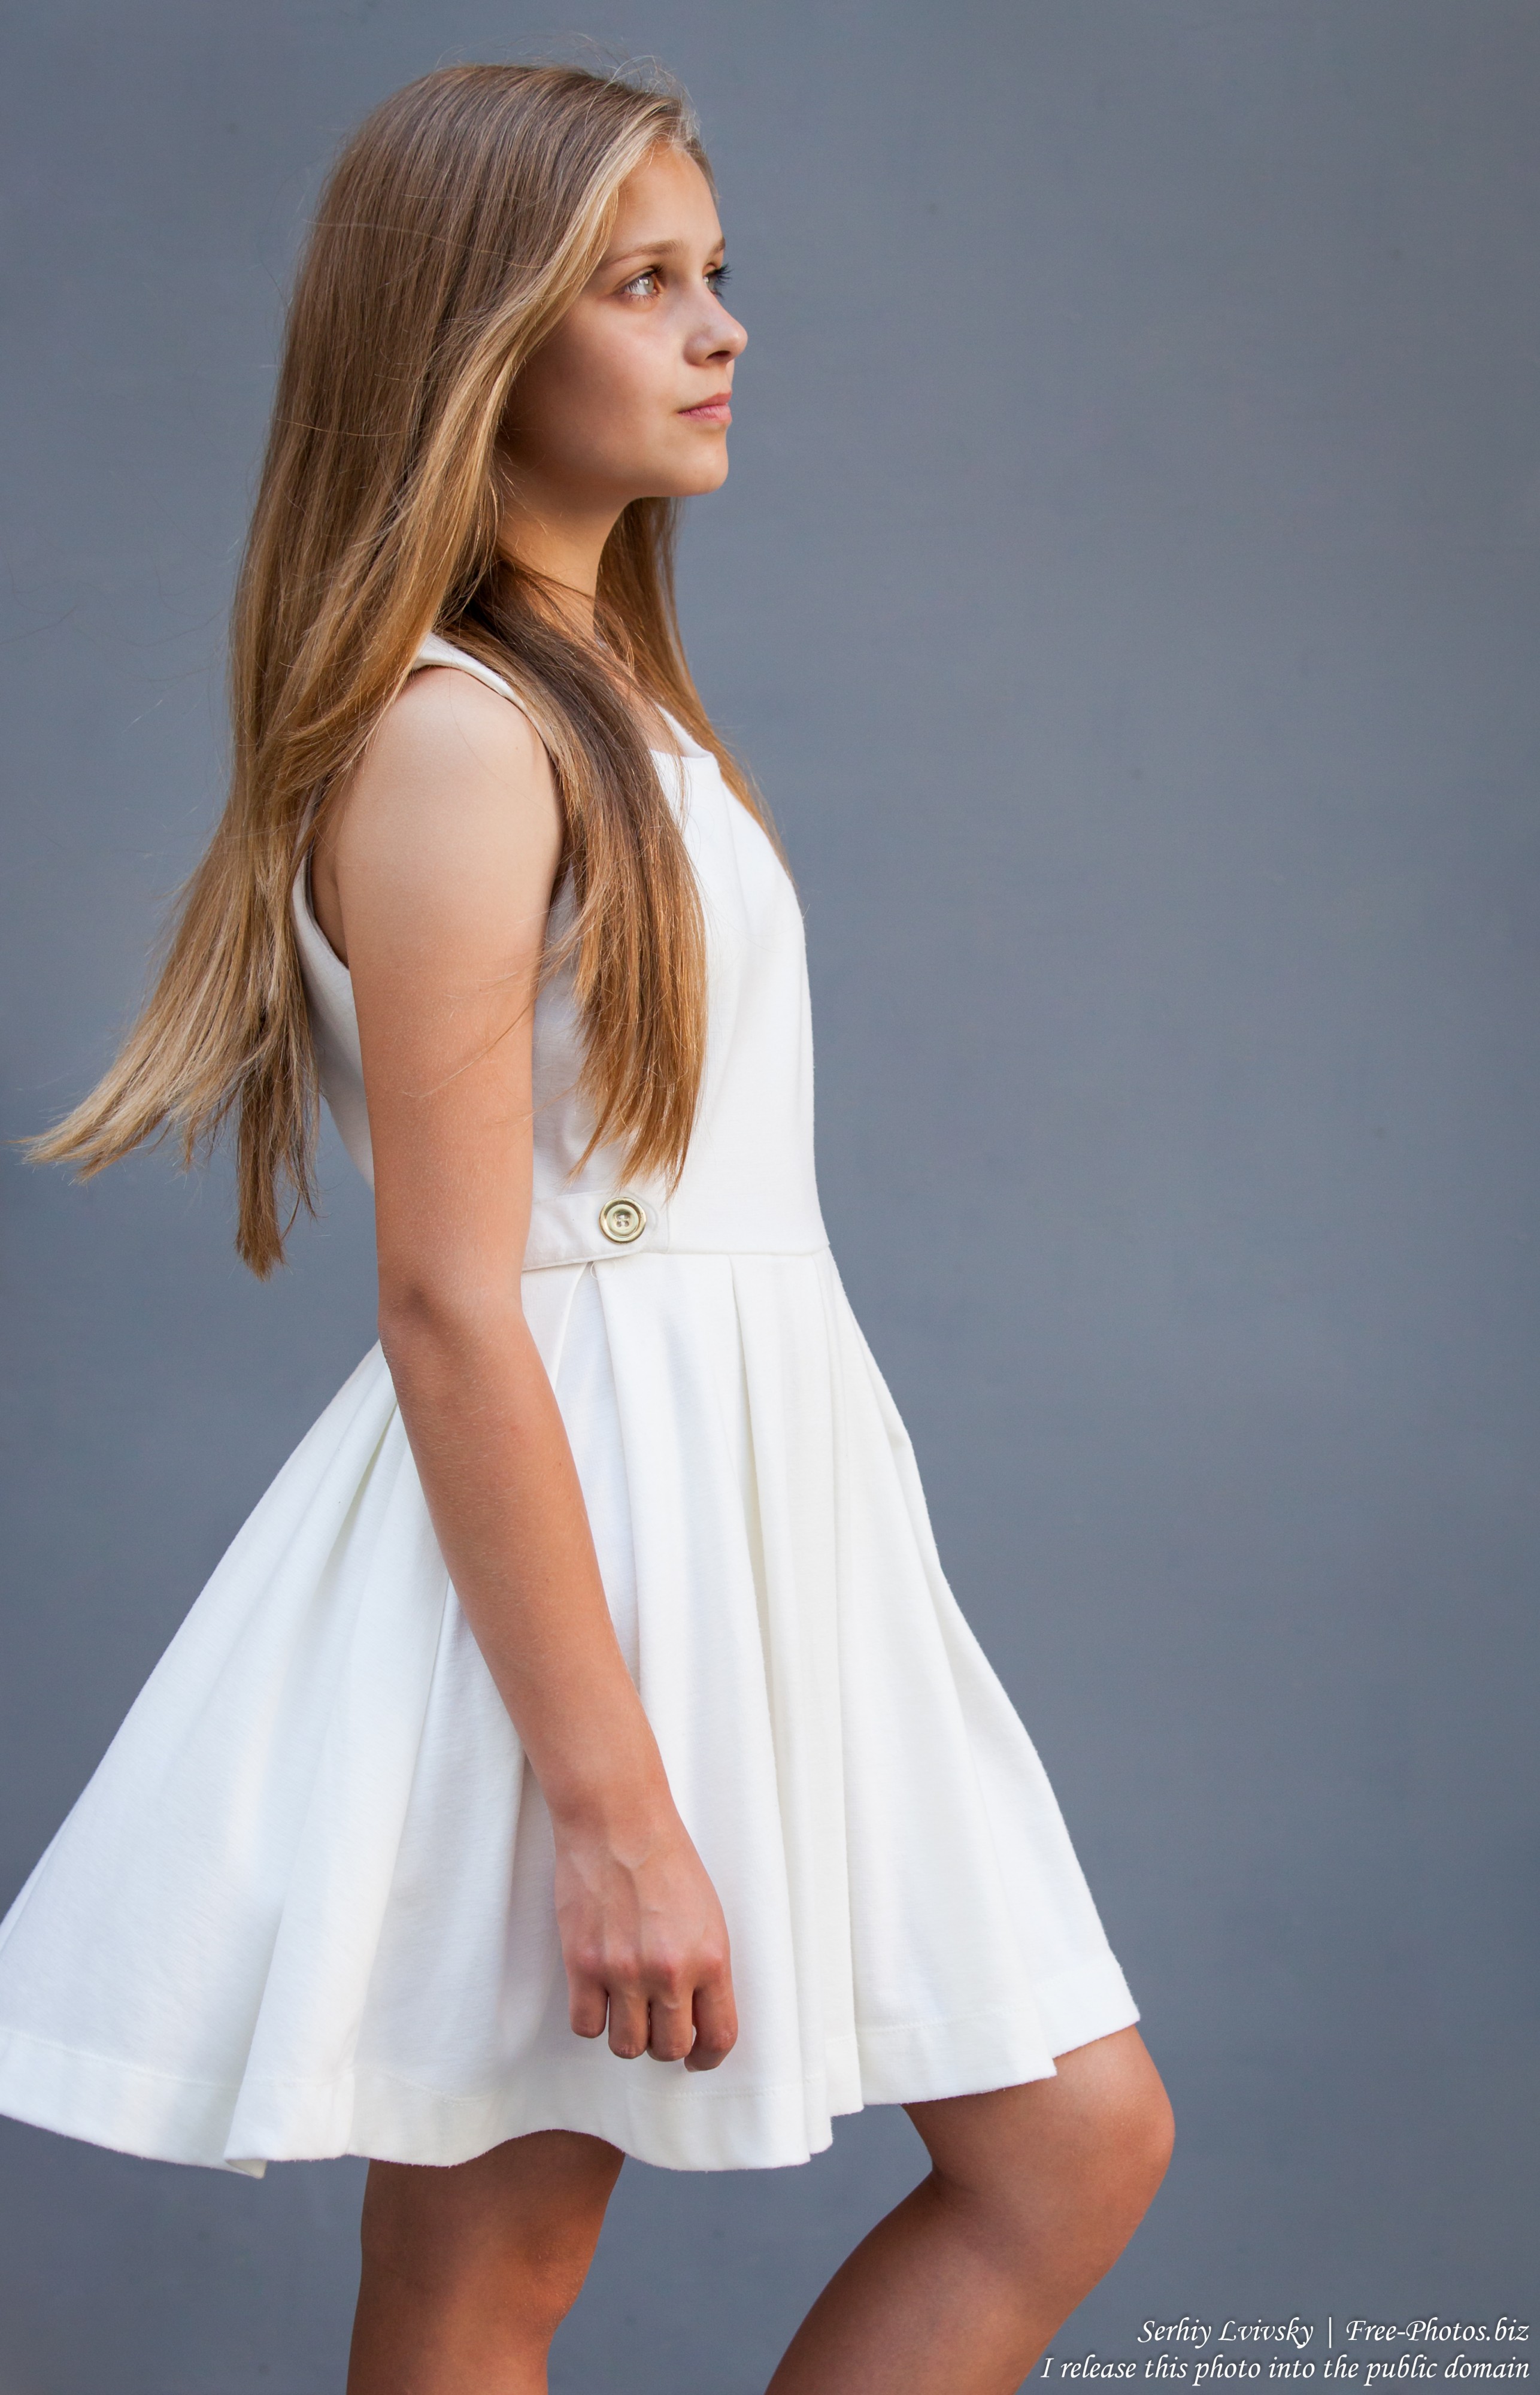 Photo Of A Year Old Blond Girl Wearing A White Dress Photographed In